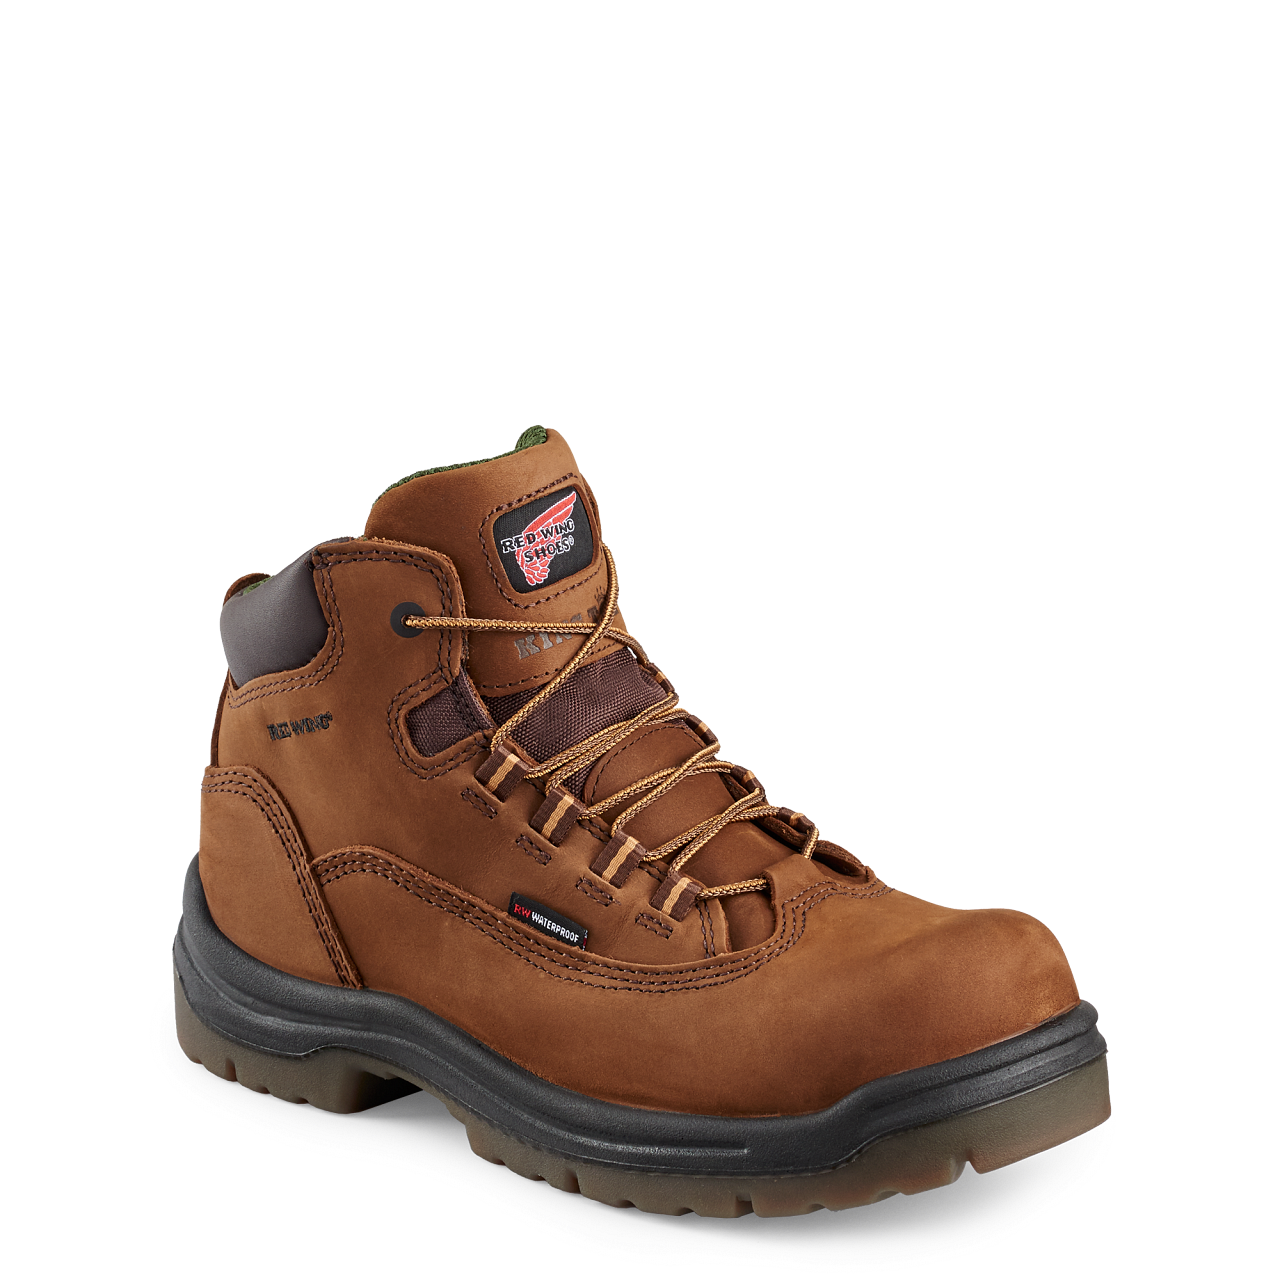 Red Wing 2340 King Toe Women's 5-Inch Waterproof Safety Toe Boot